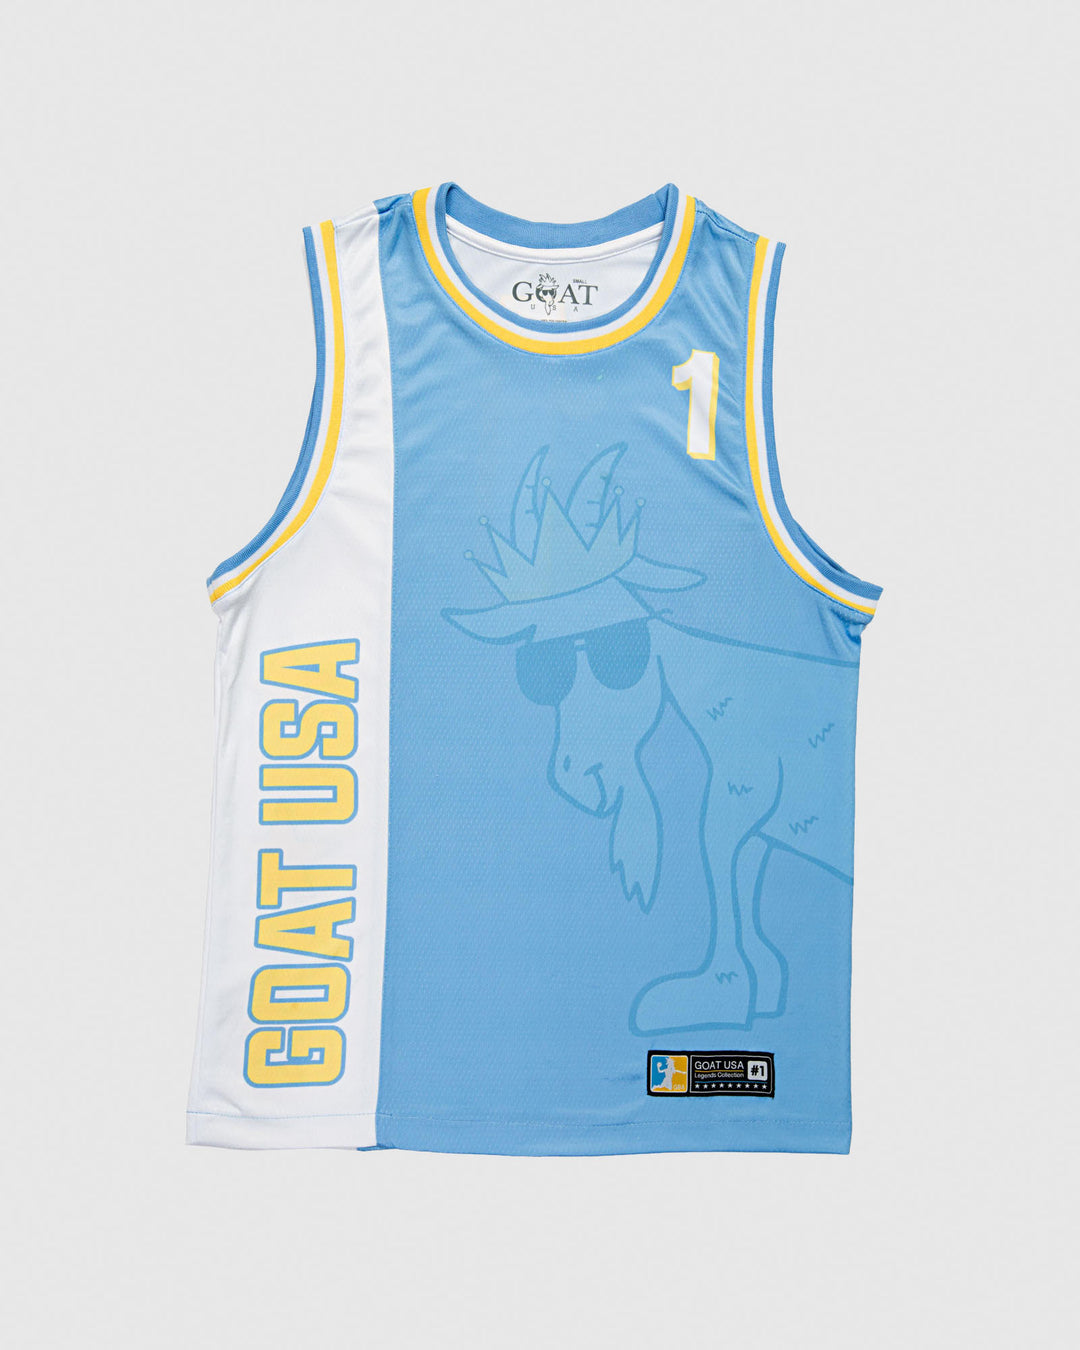 Carolina blue, white and gold jersey with goat design that wraps around